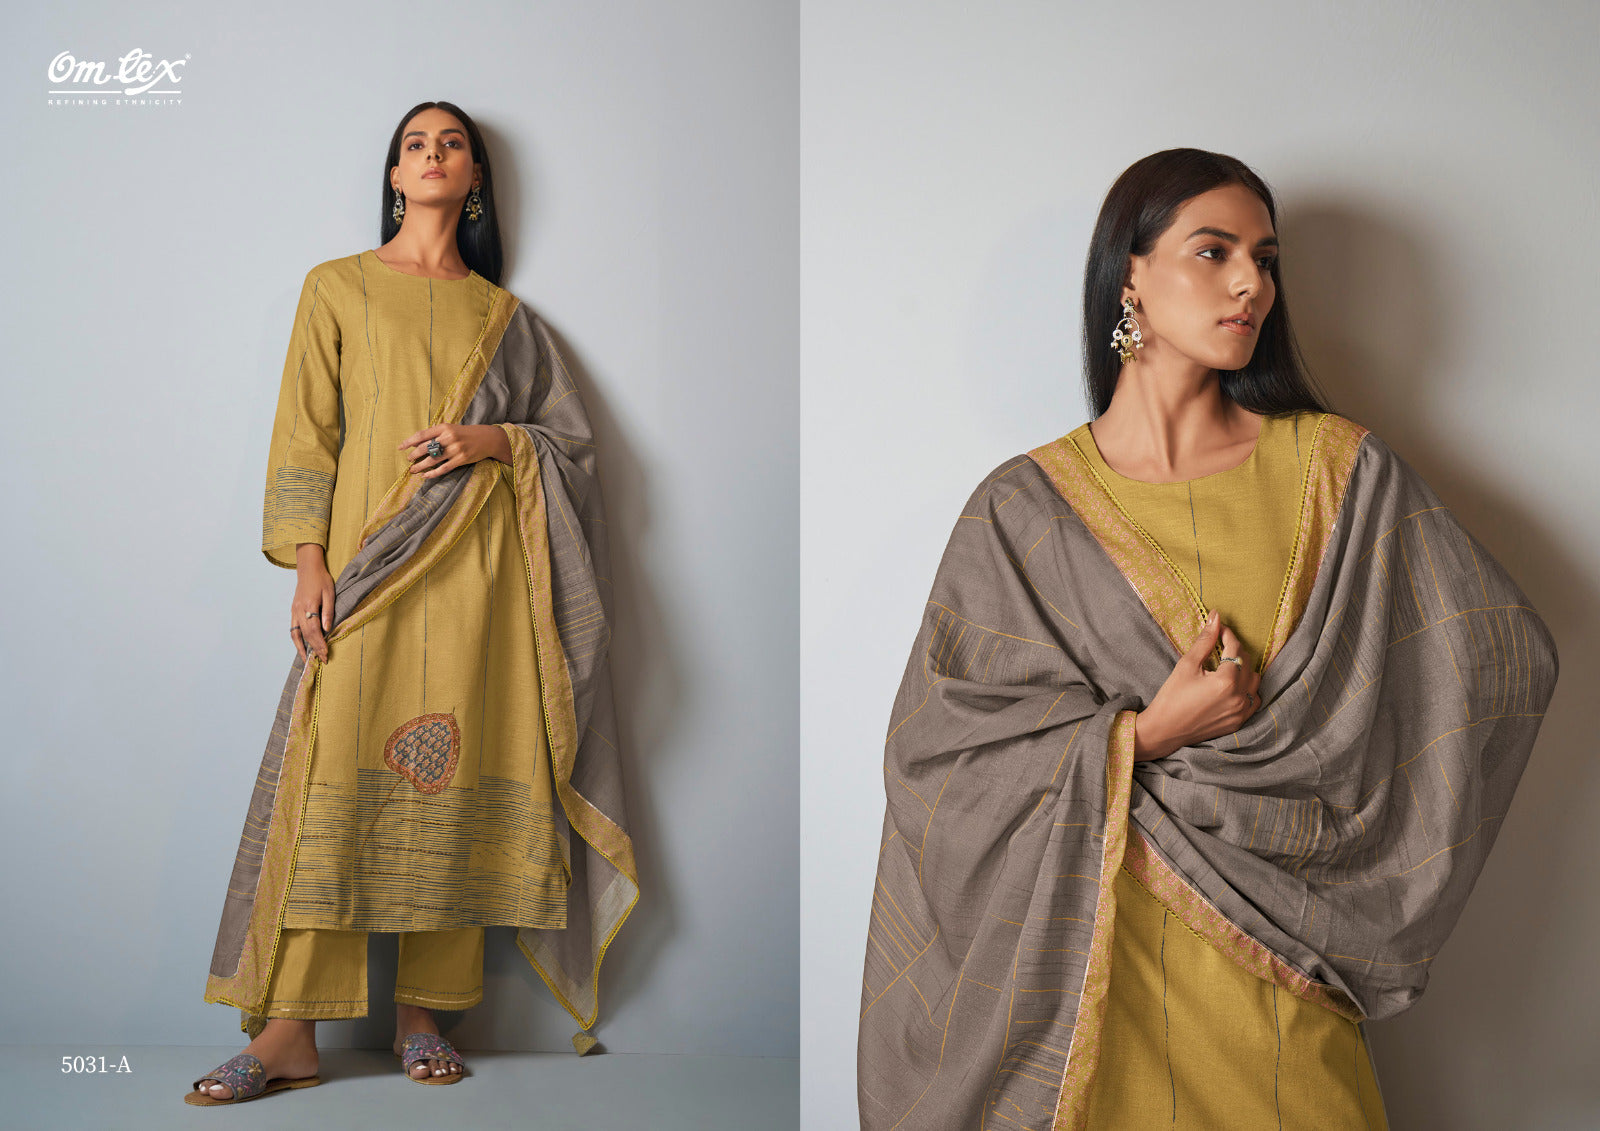 Aapti Omtex Linen Cotton Pant Style Suits